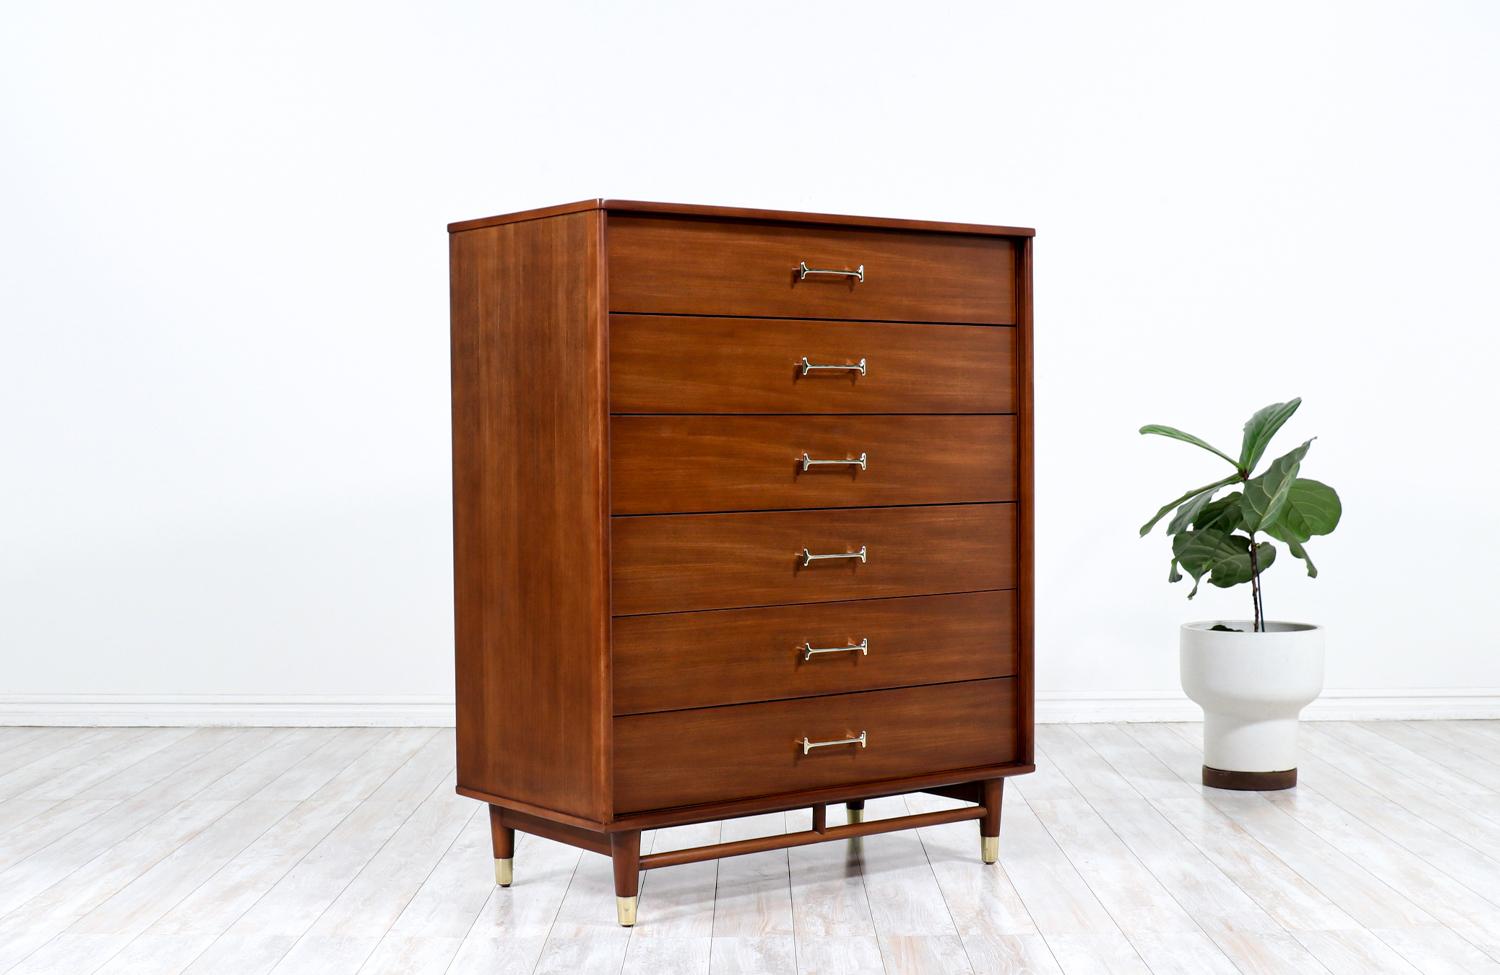 Walnut chest of drawers with brass handles from Drexel's New Today's Living Collection.

________________________________________

Transforming a piece of Mid-Century Modern furniture is like bringing history back to life, and we take this journey